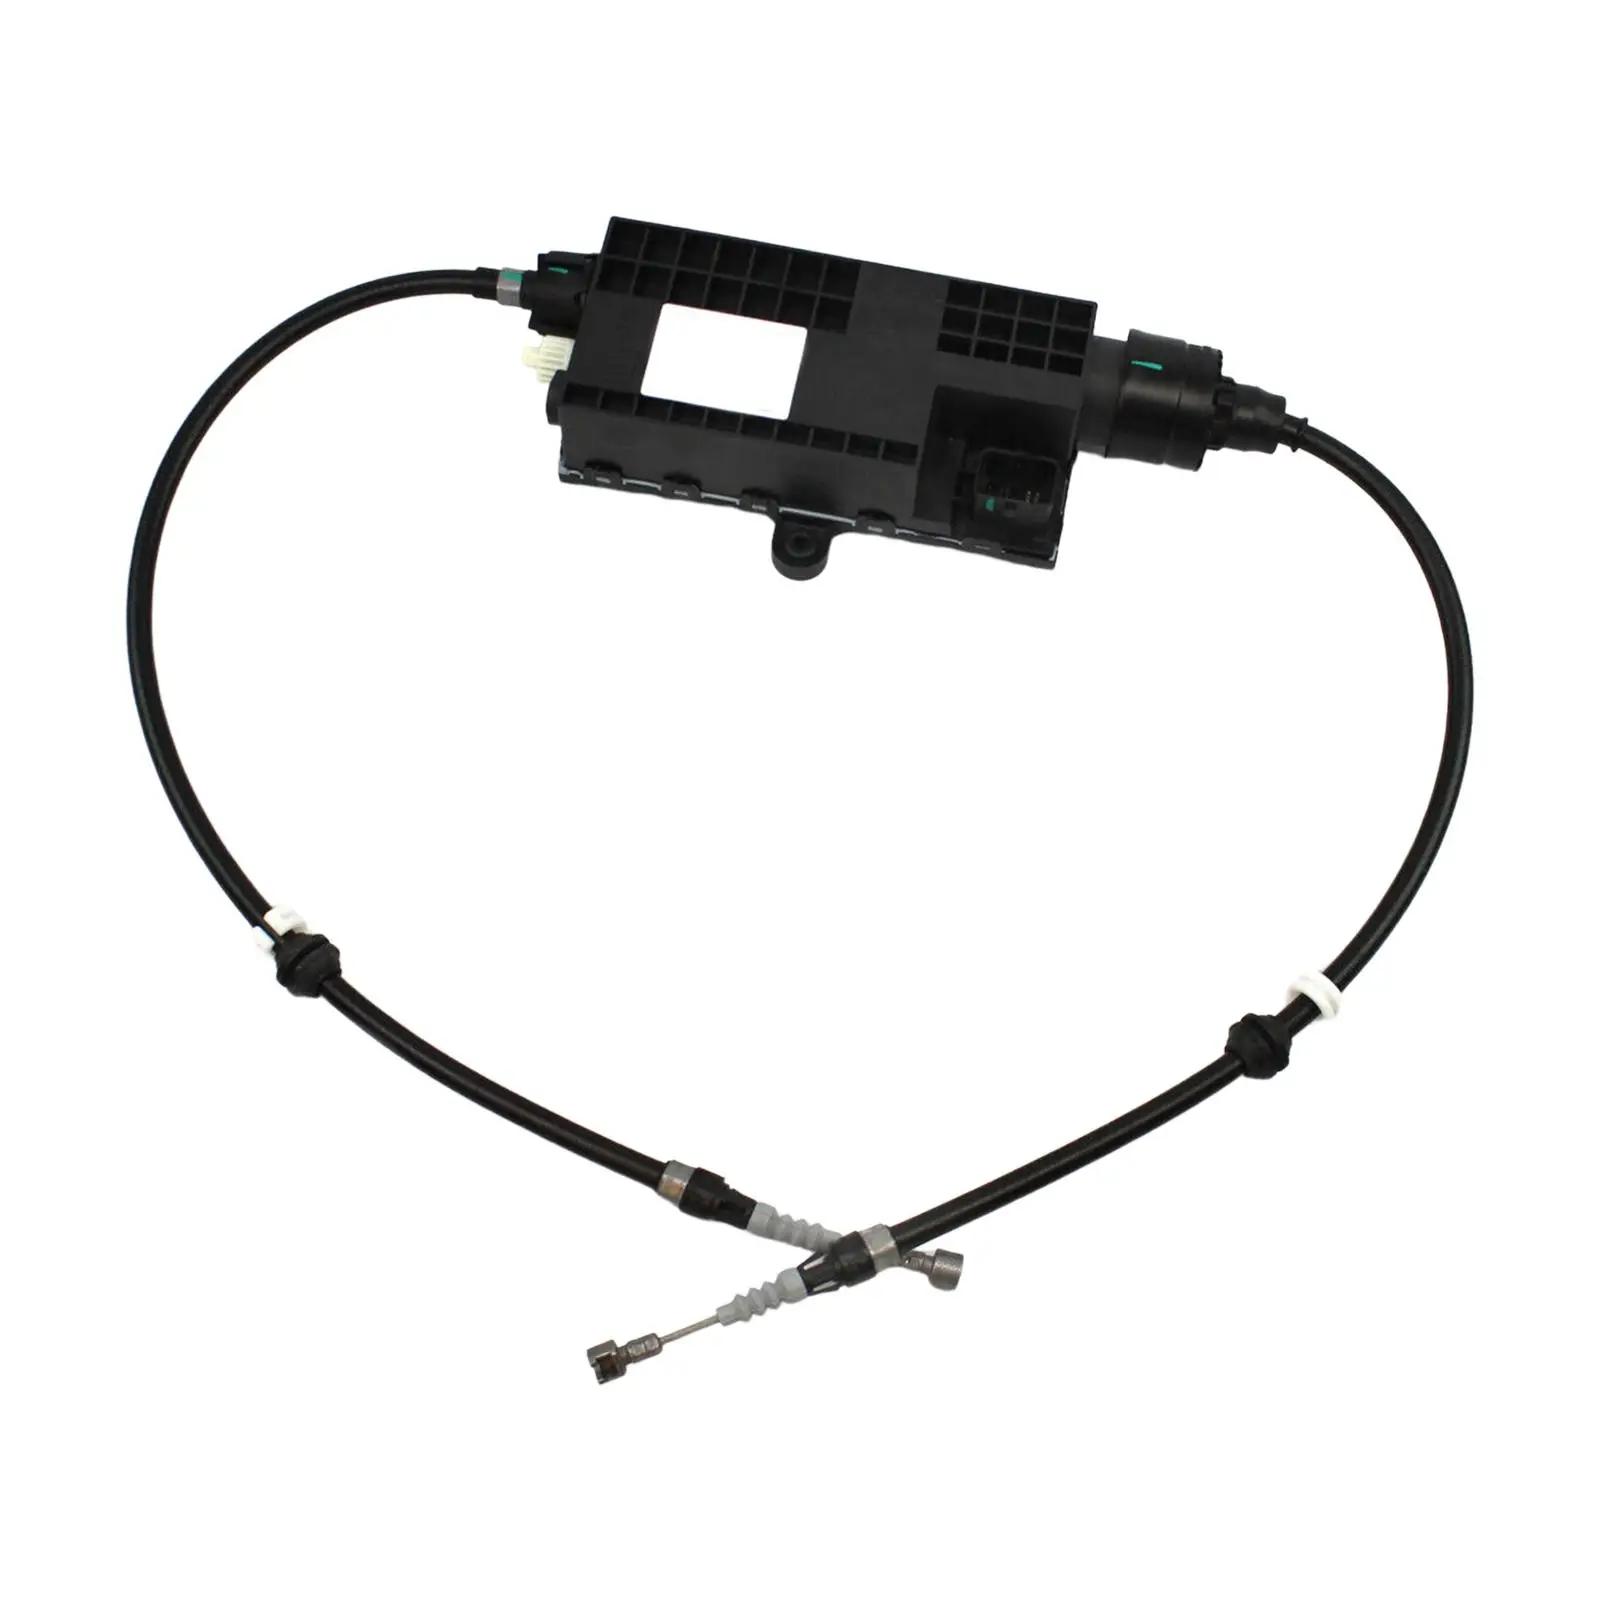 4479068700 Accessories Parking Brake Handbrake Actuator Replacement Easy to Install for Mercedes-benz V-class vito 447